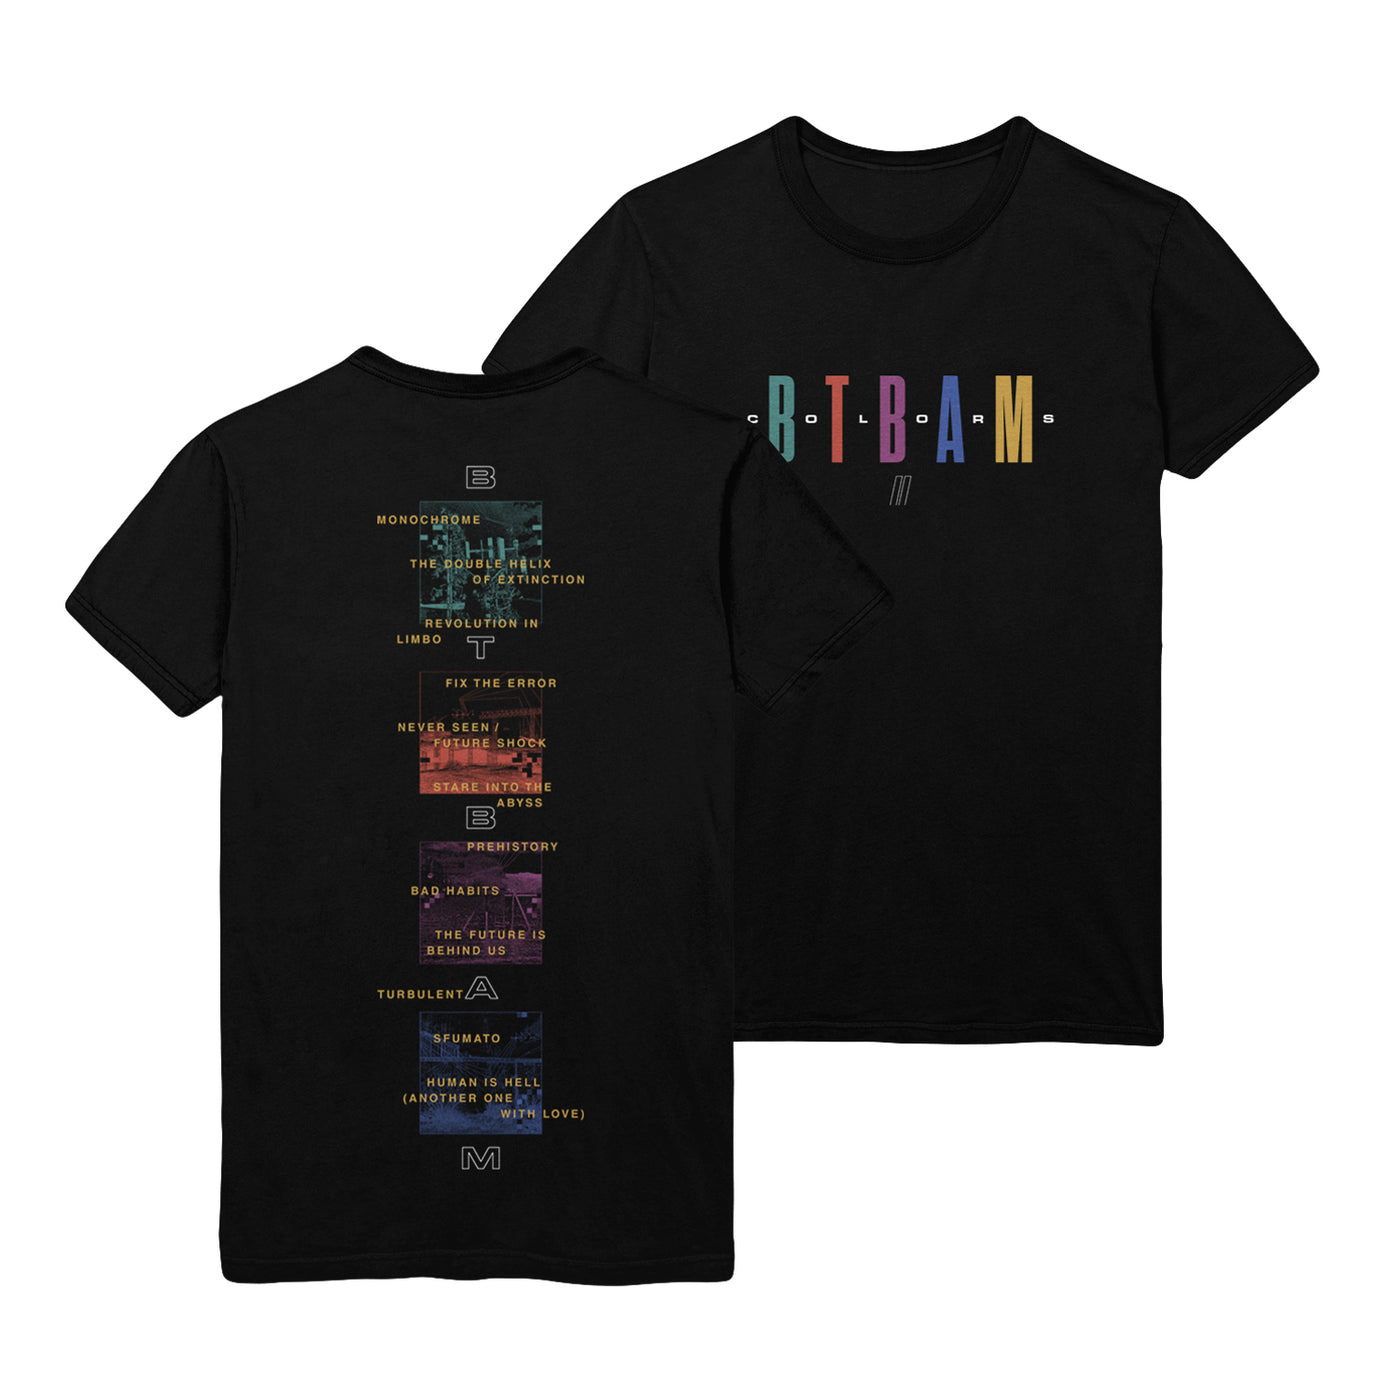 Between The Buried And Me - 'Sequence' T-Shirt (Black)